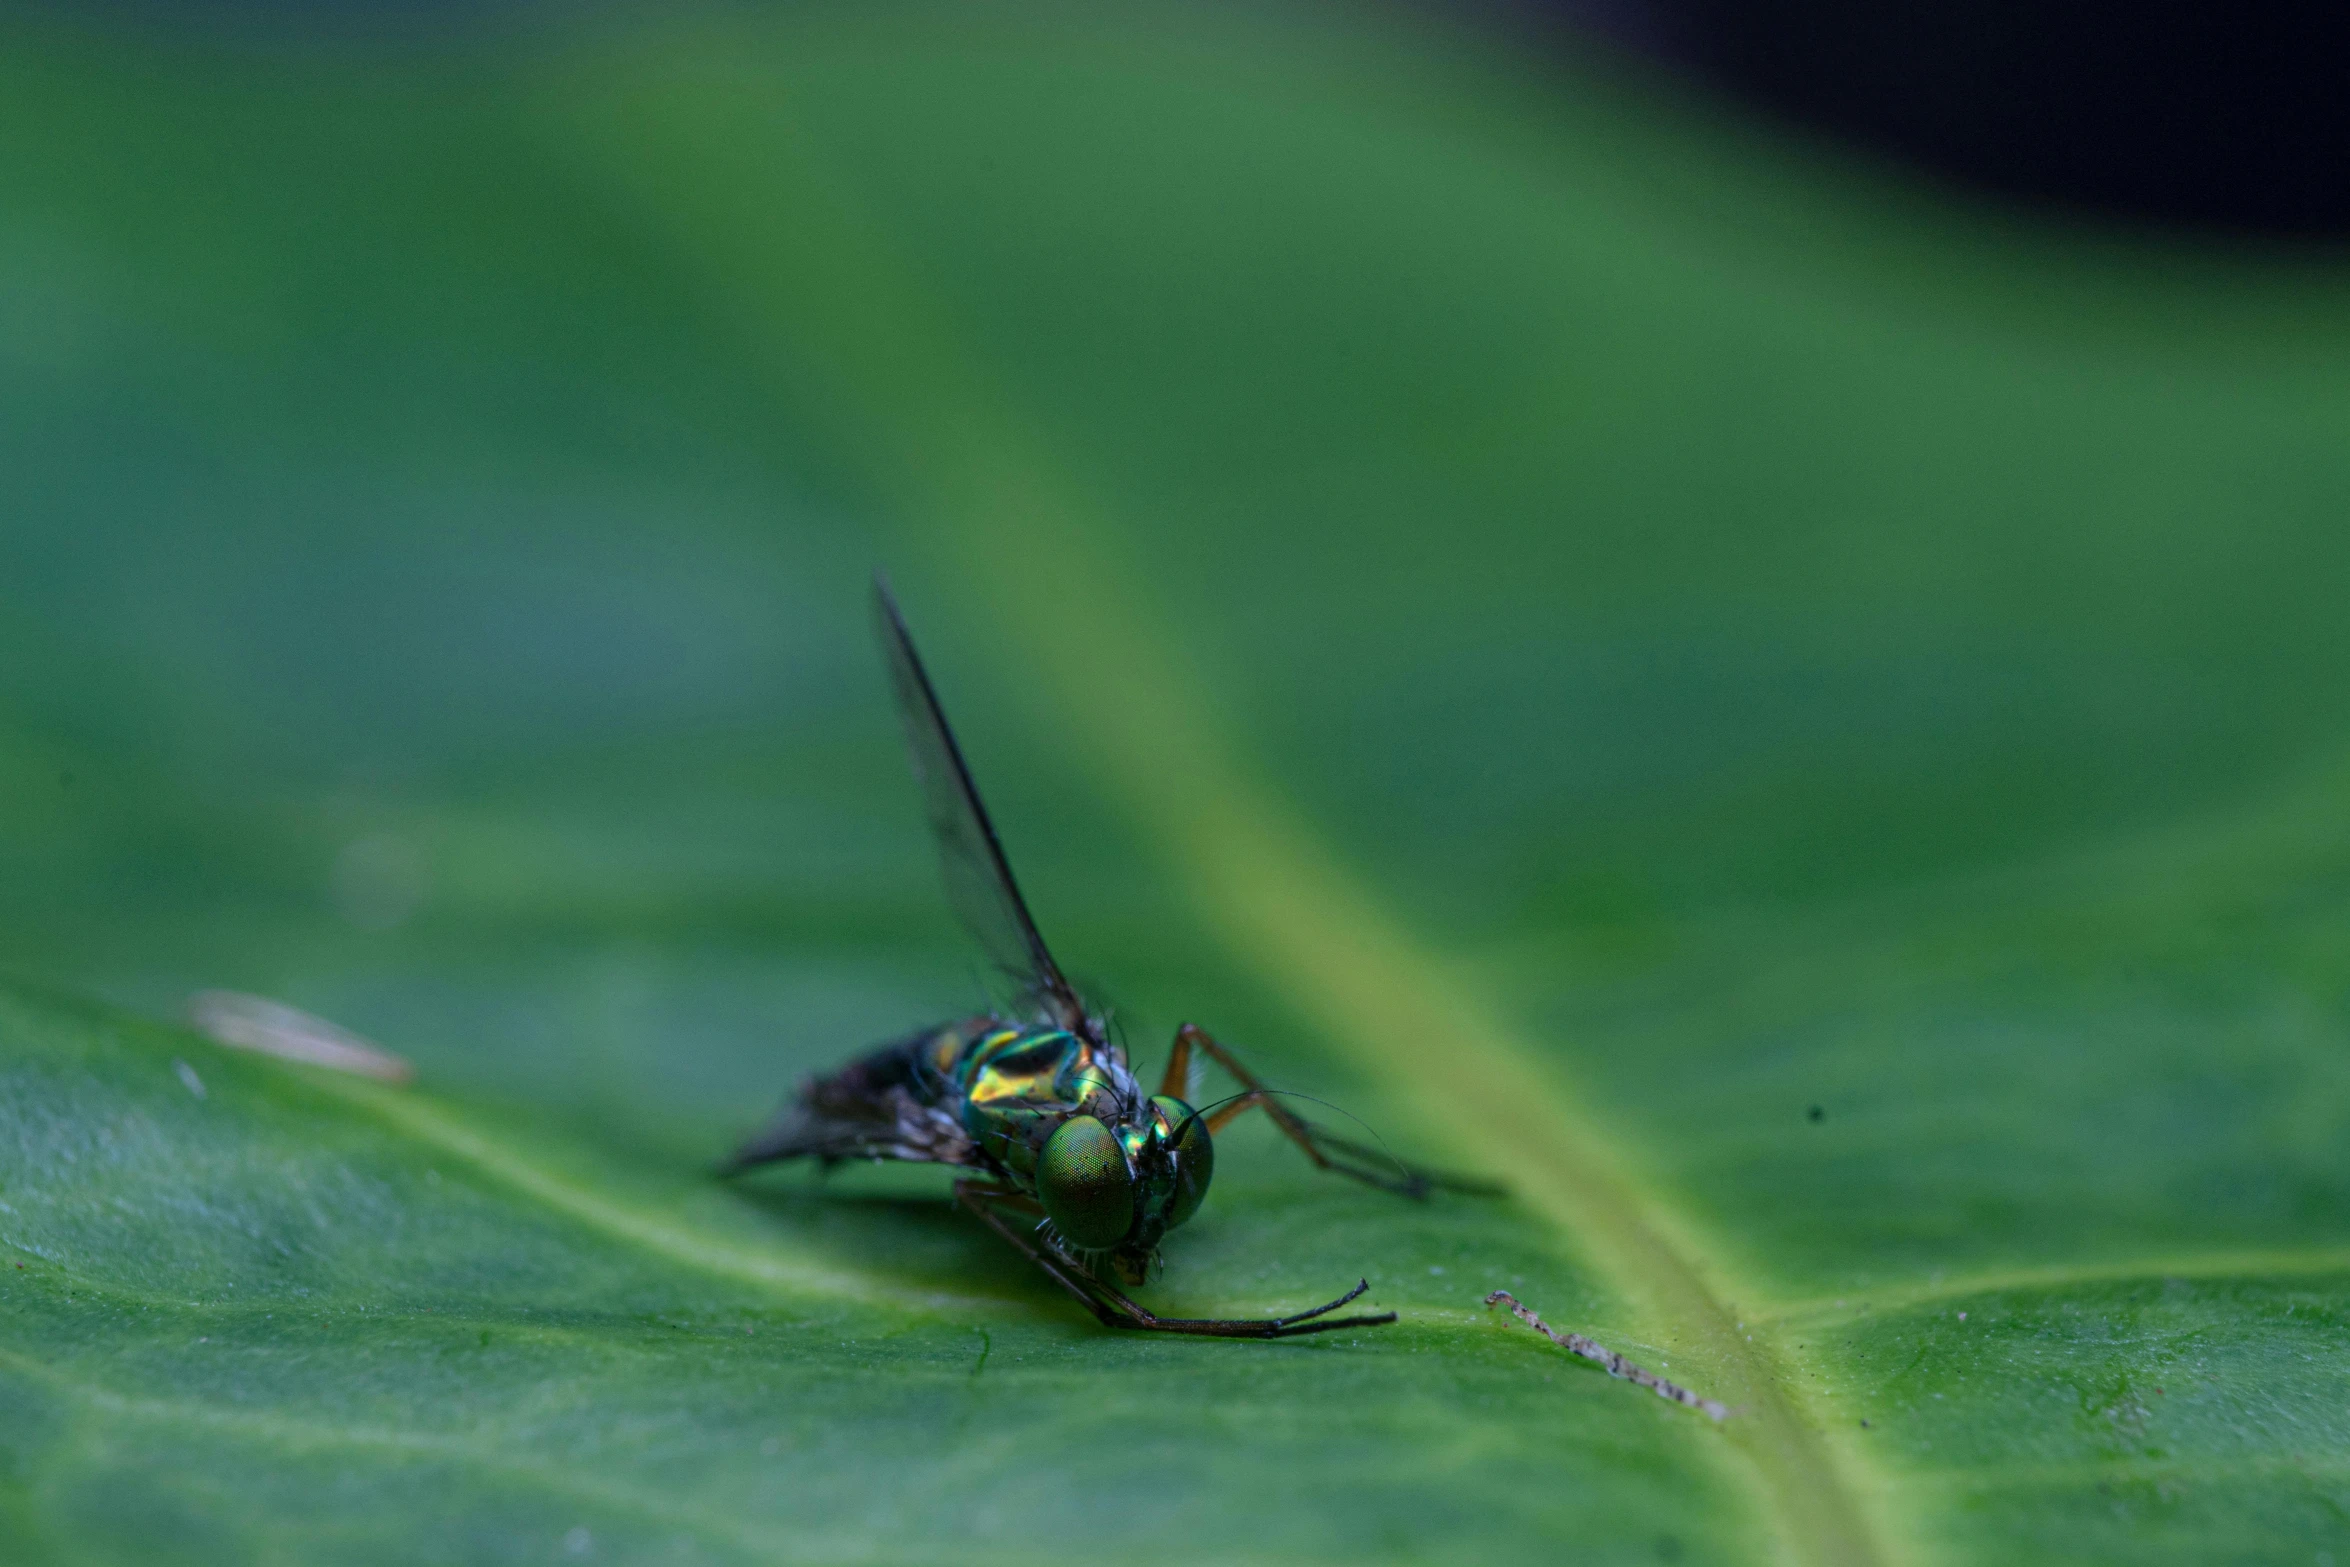 the blue fly is sitting on top of the green leaf